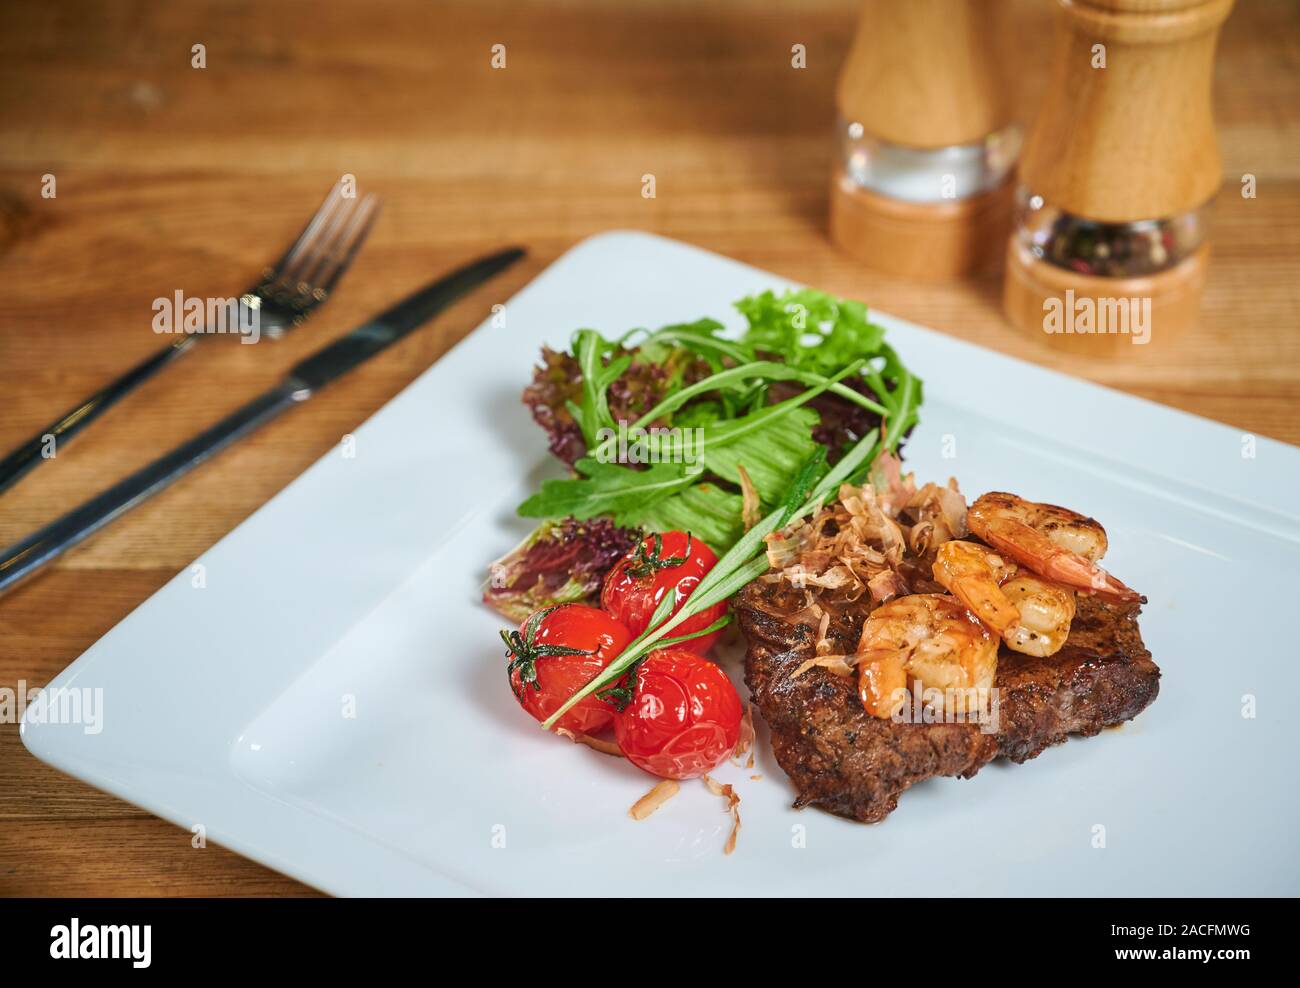 Grilling steak. Dish of meat on a plate adding with shrimp, tomatoes and salad. Arrangement with cutlery Stock Photo